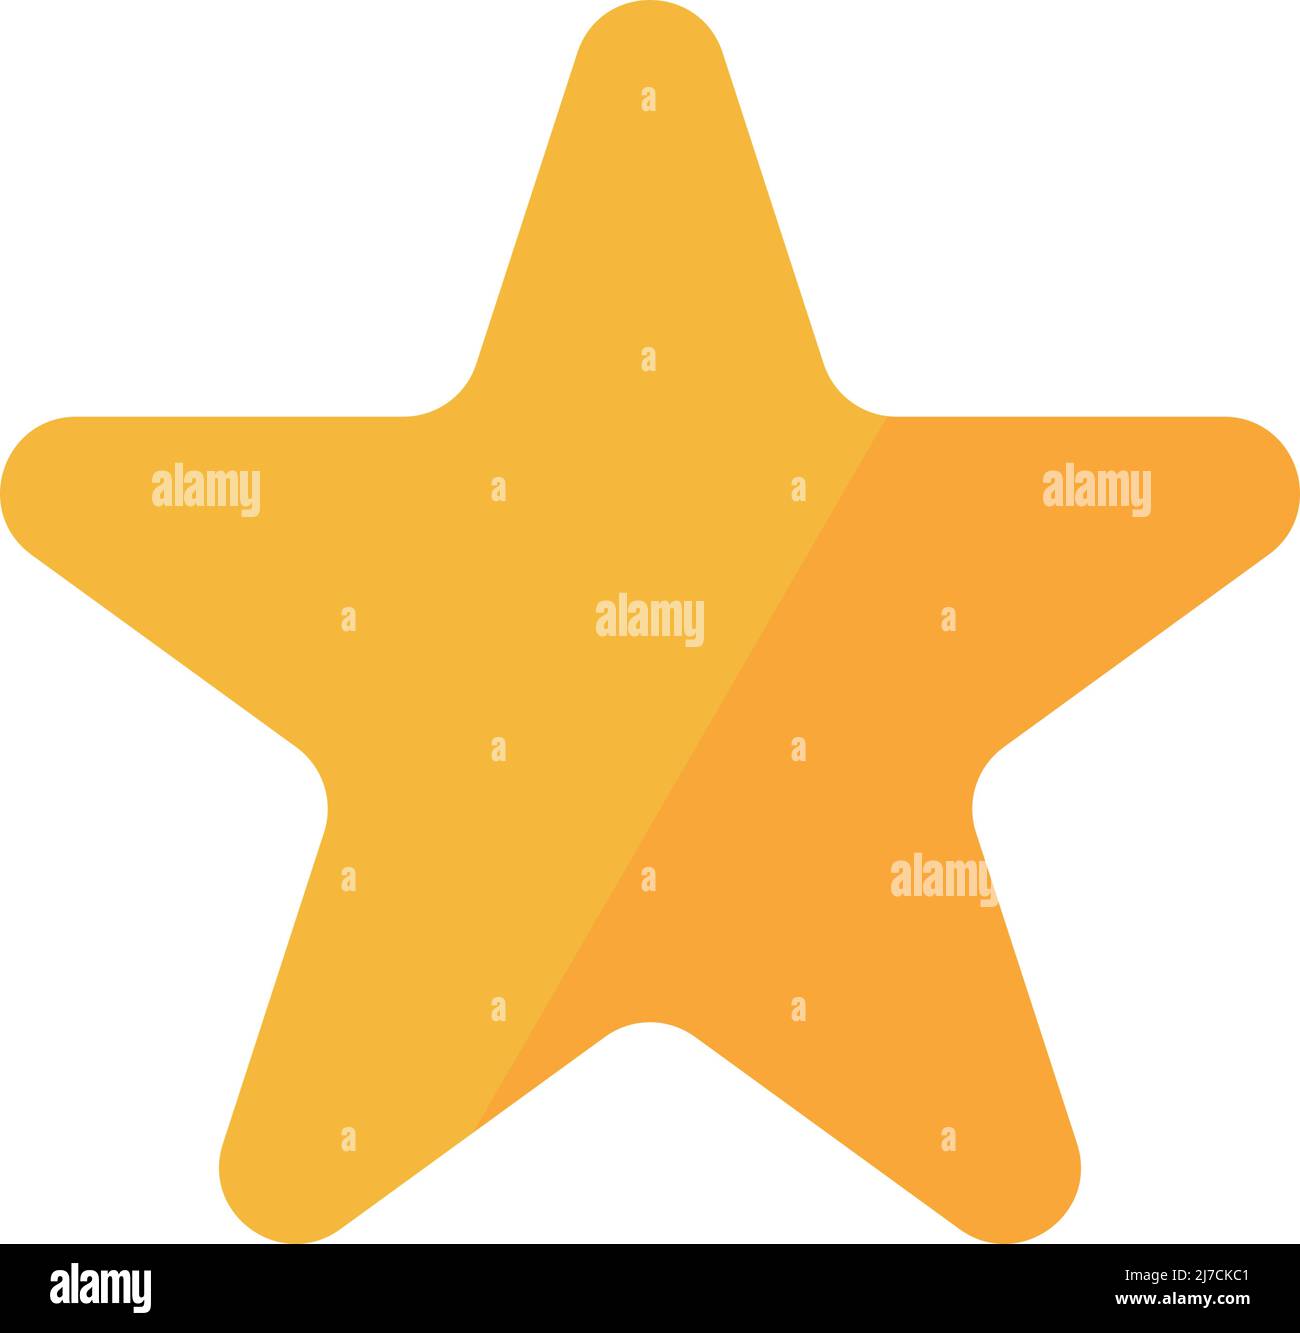 Star icon. Rating and review icon. Editable vector. Stock Vector